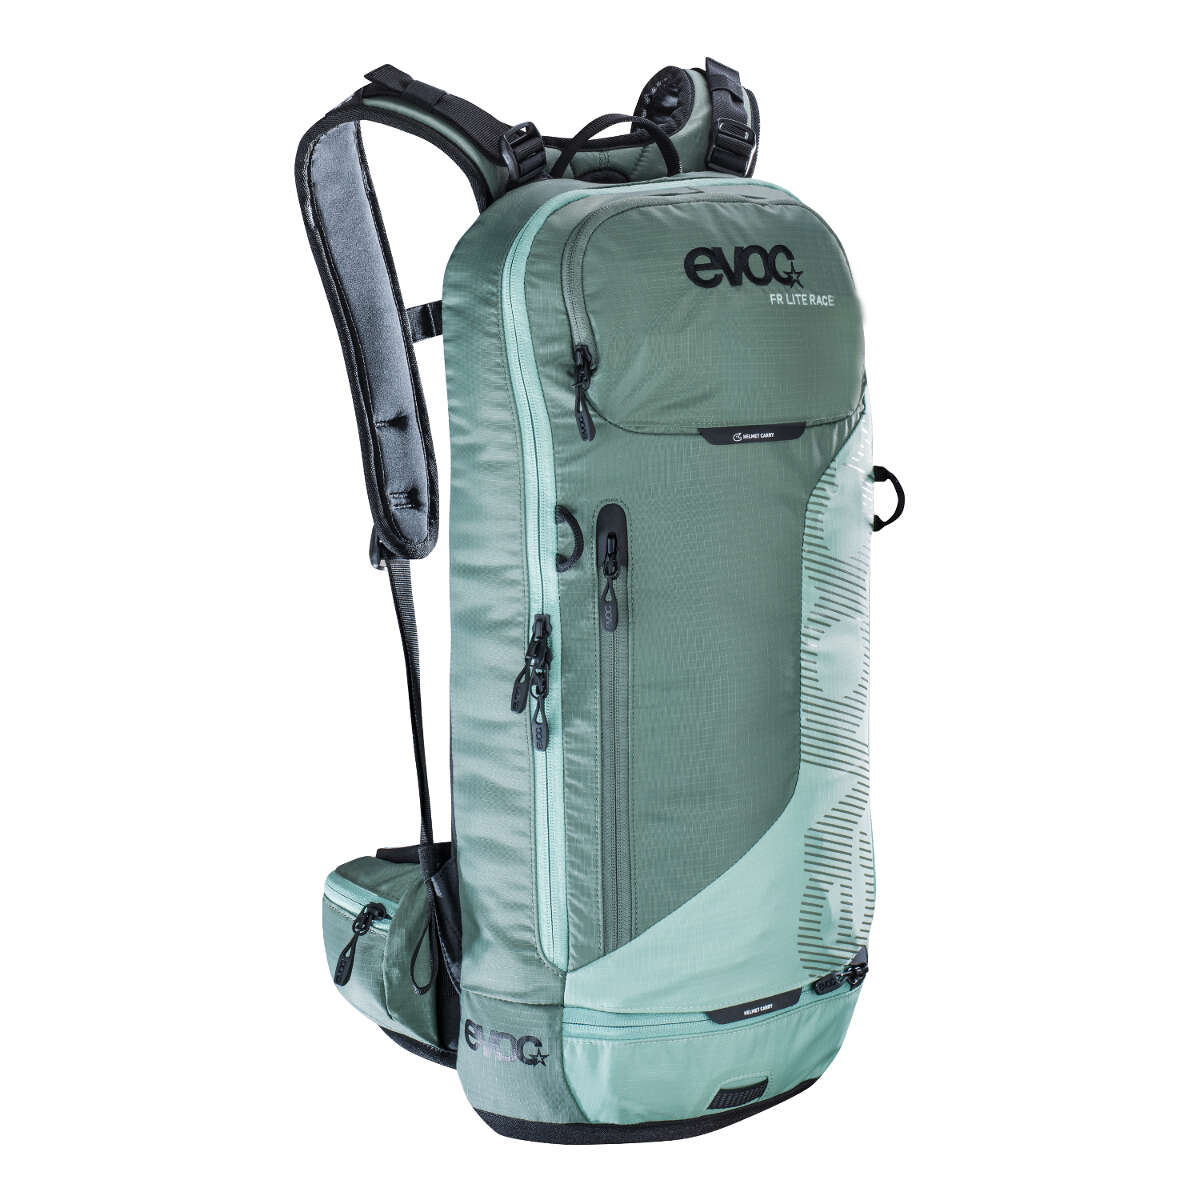 Evoc Protector Backpack with Hydration System Compartment FR Lite Race Olive-Light Petrol, 10 Liter